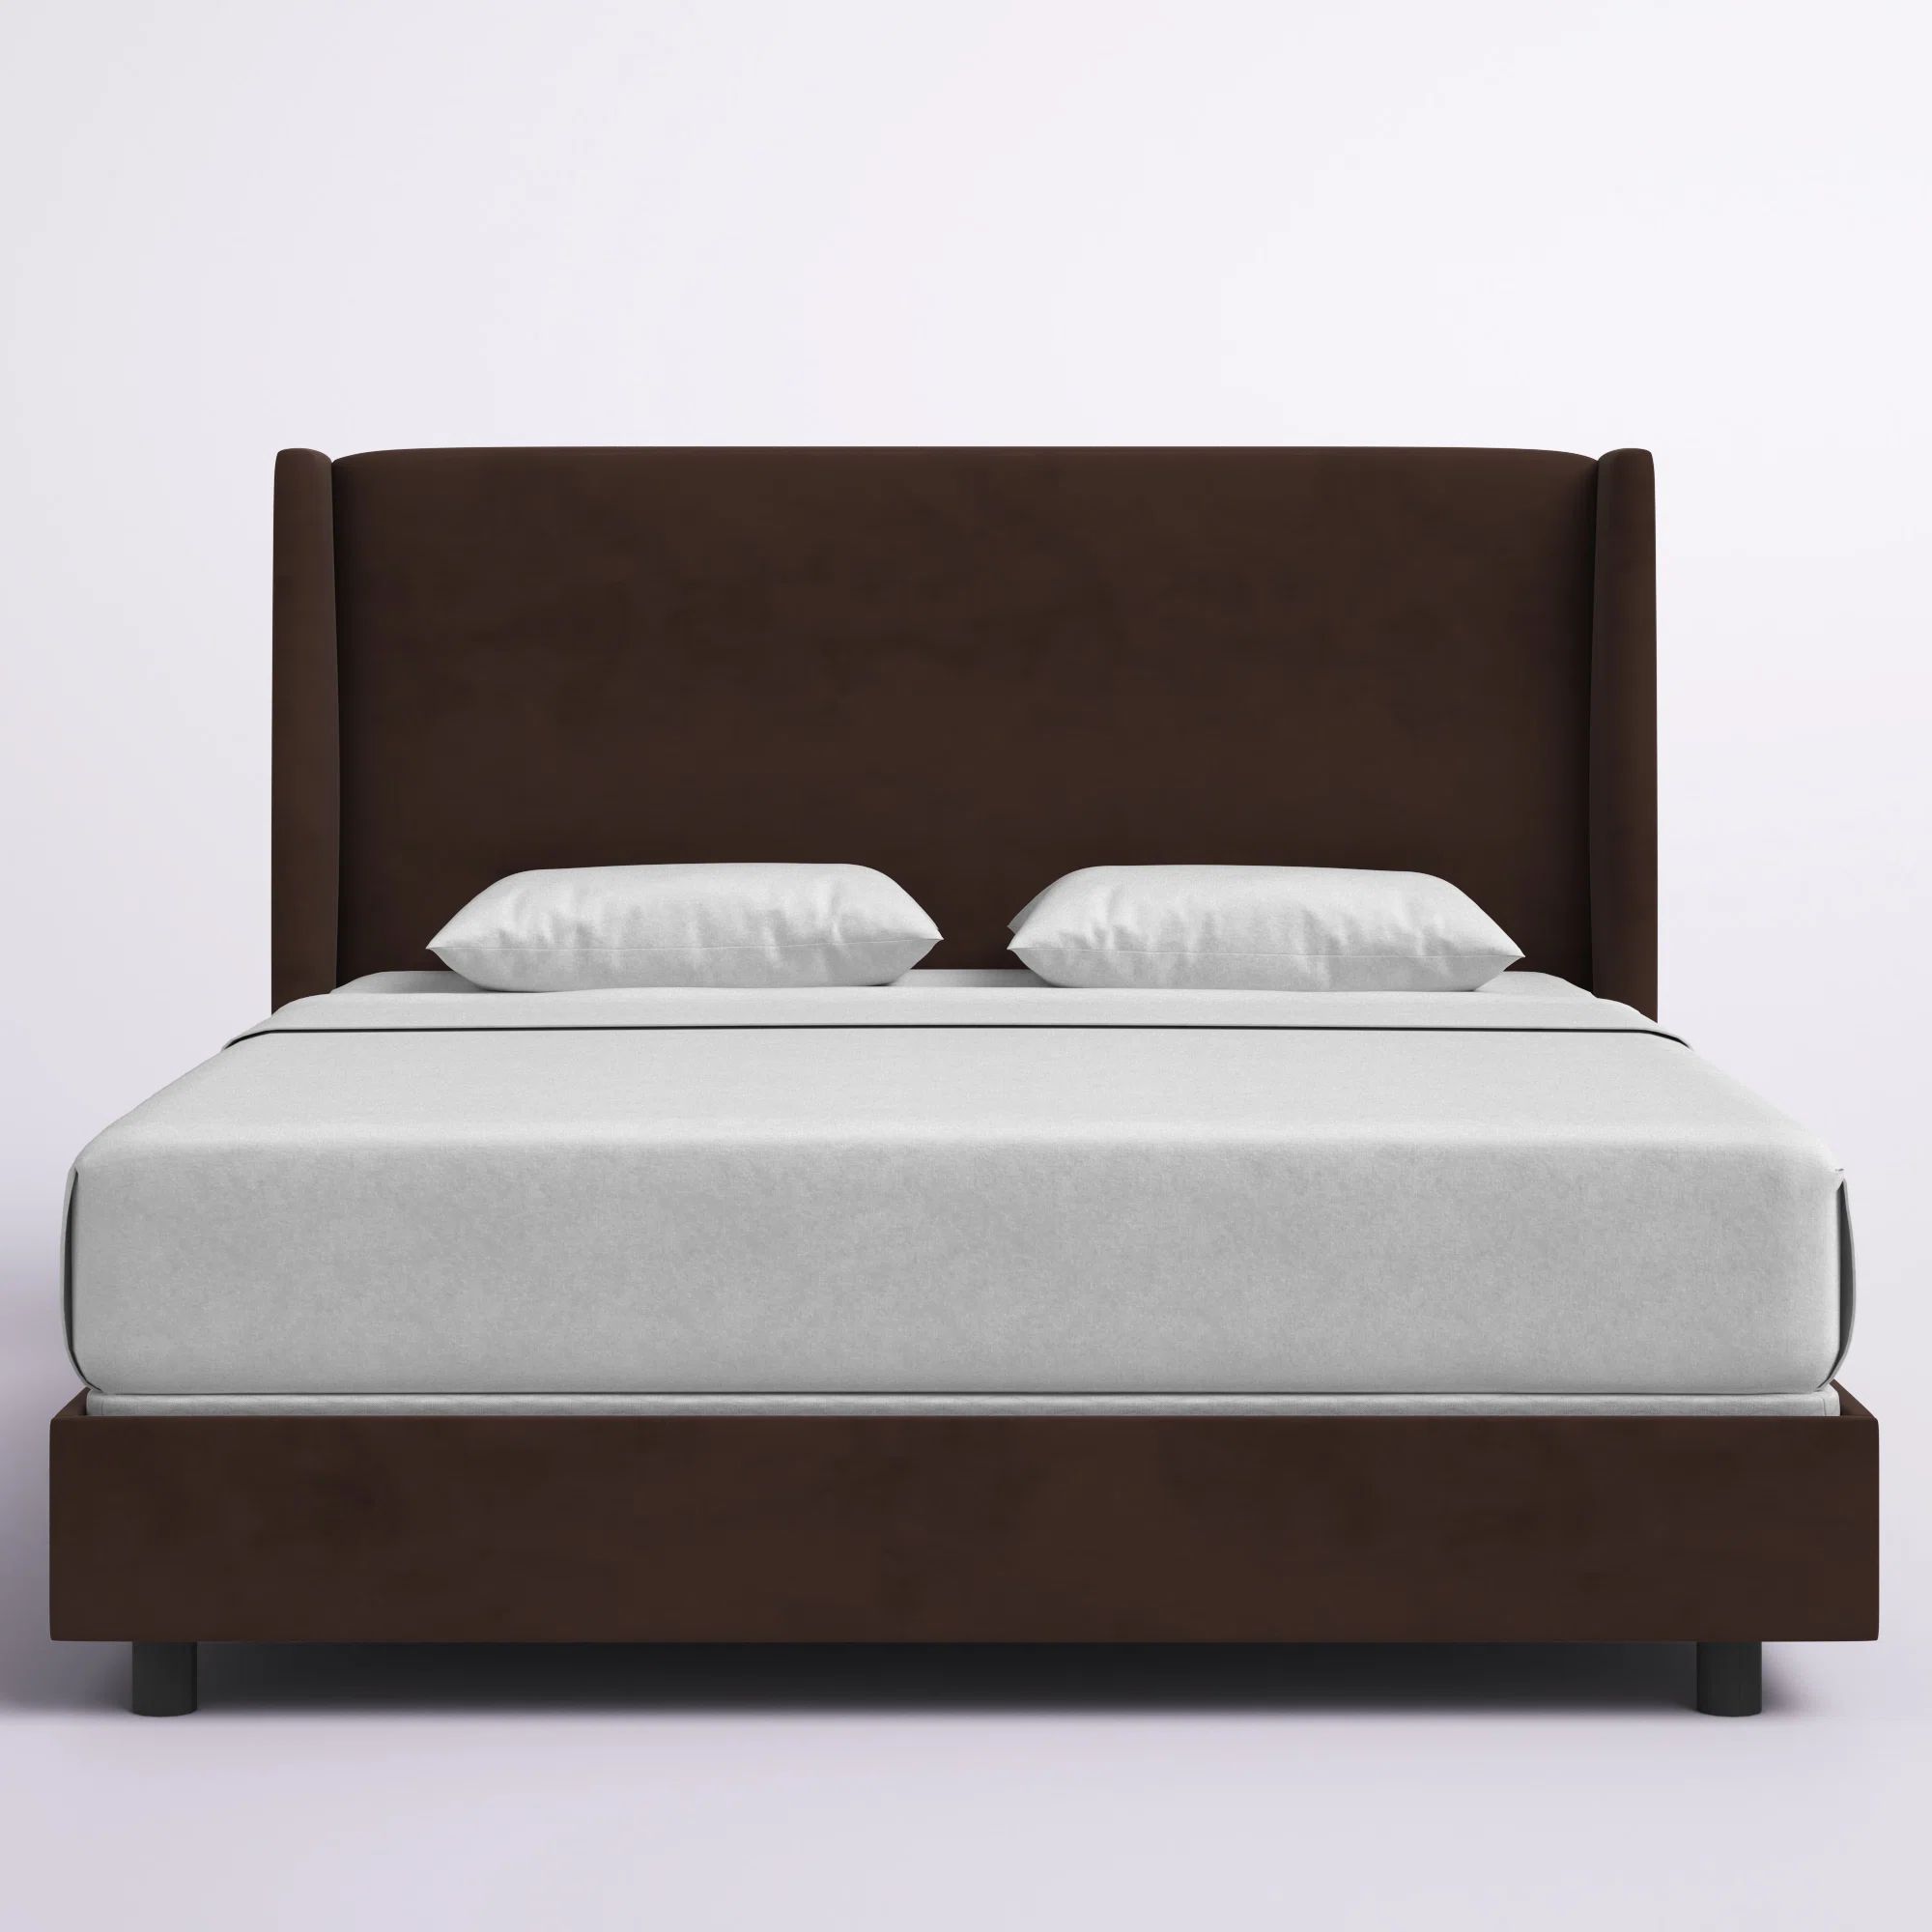 Dinapoli Upholstered Low Profile Standard Bed | Wayfair North America